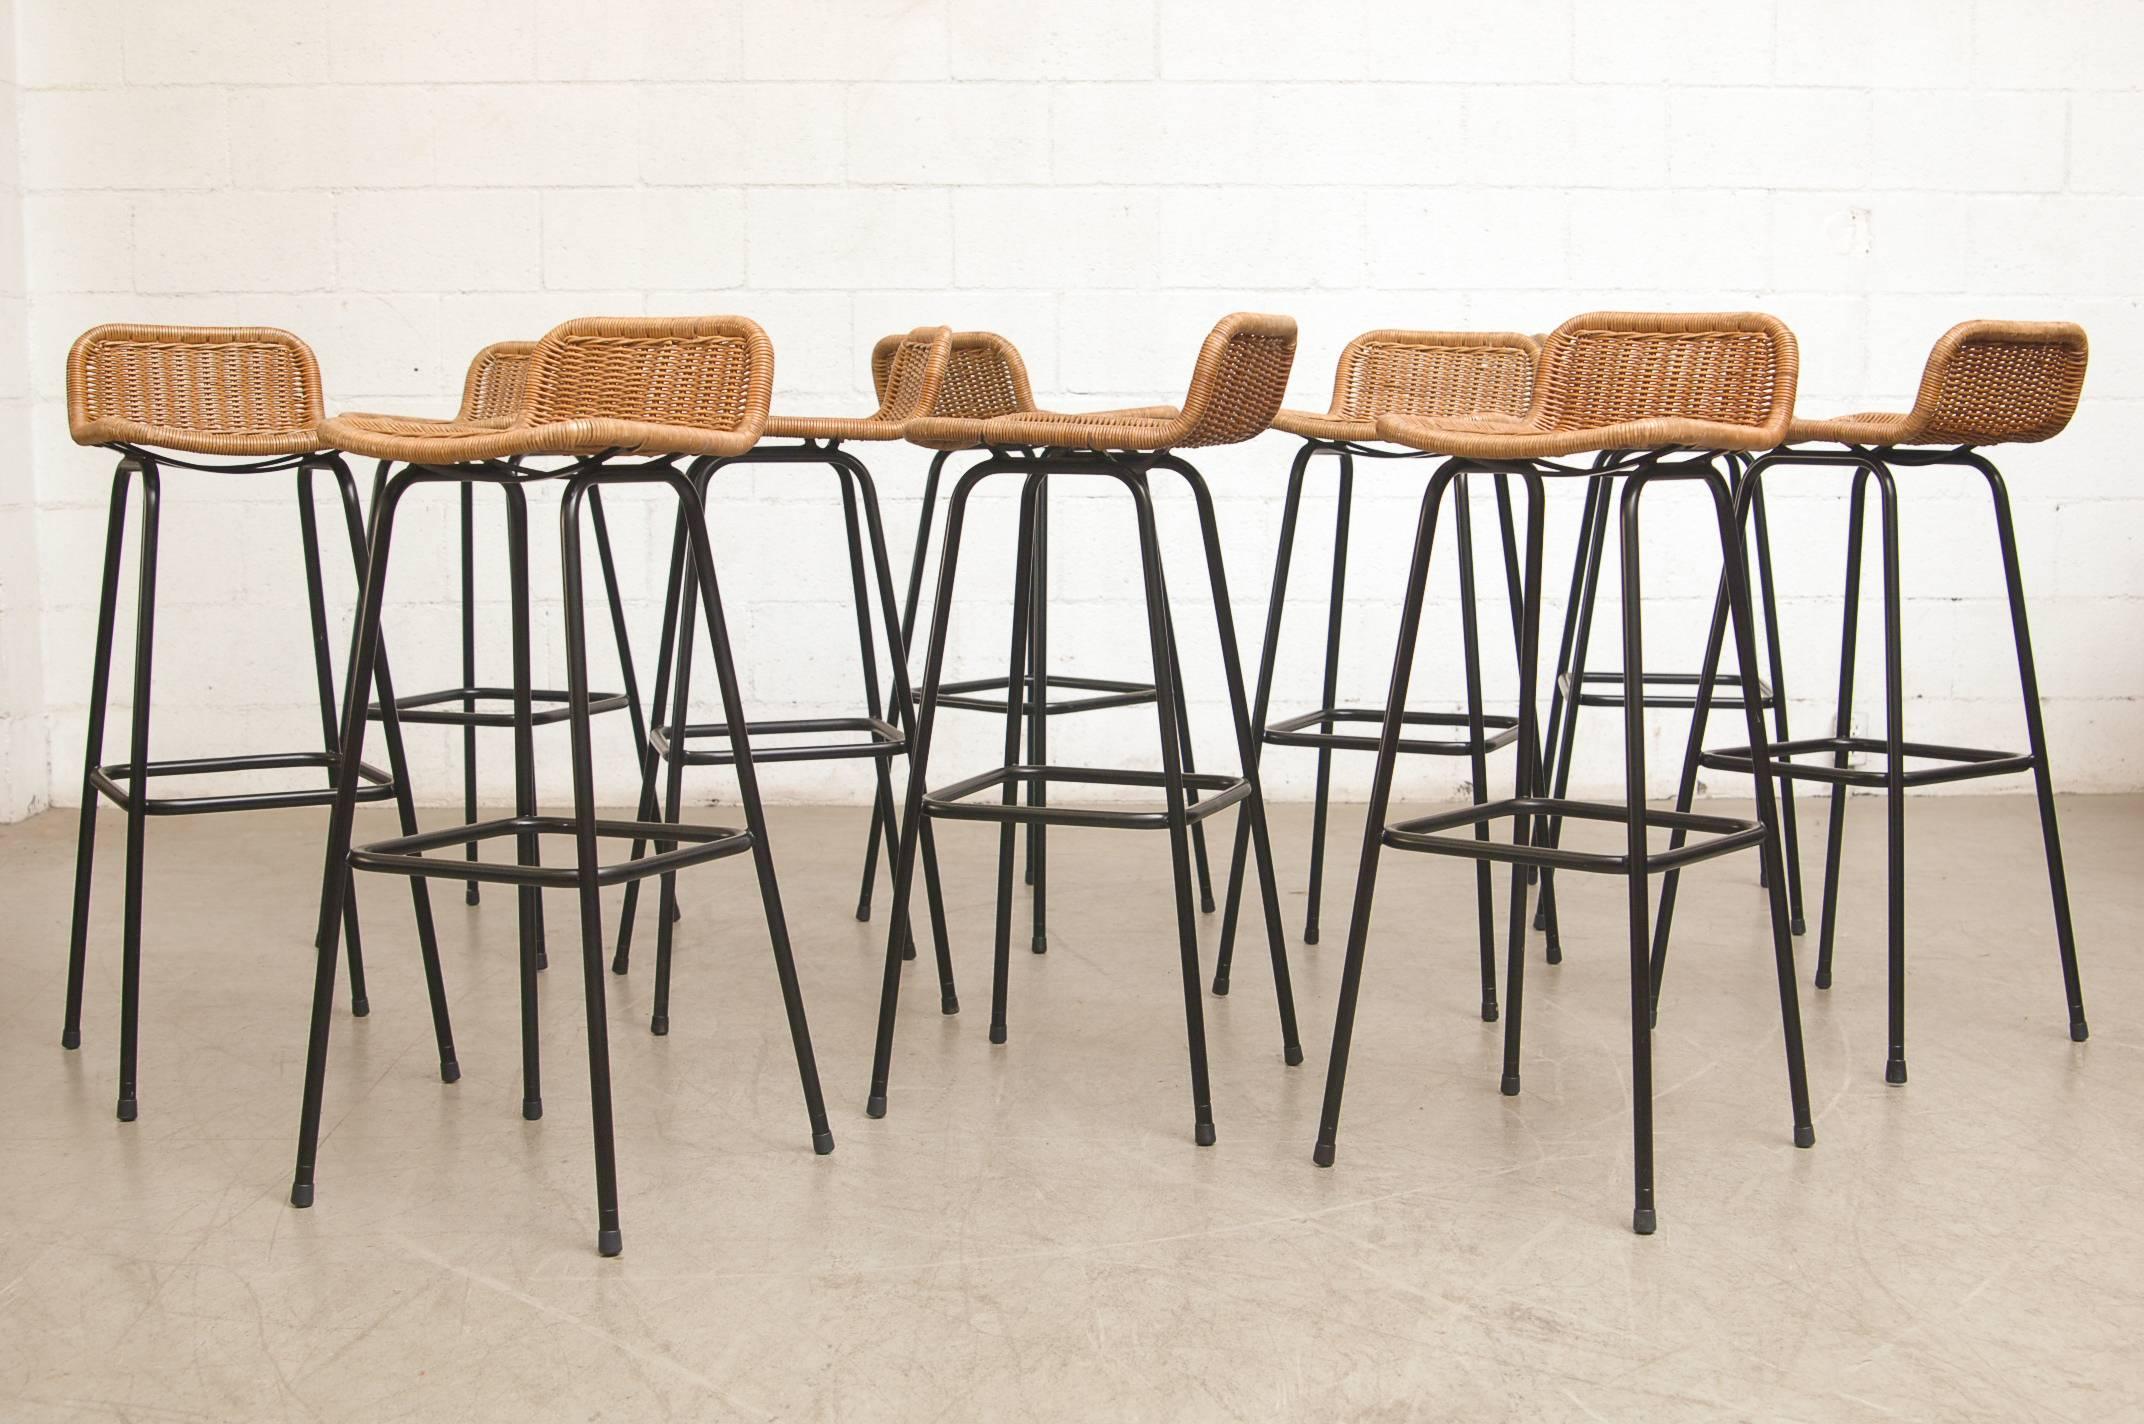 Set of 16 Charlotte Perriand Style Wicker Bar Stools